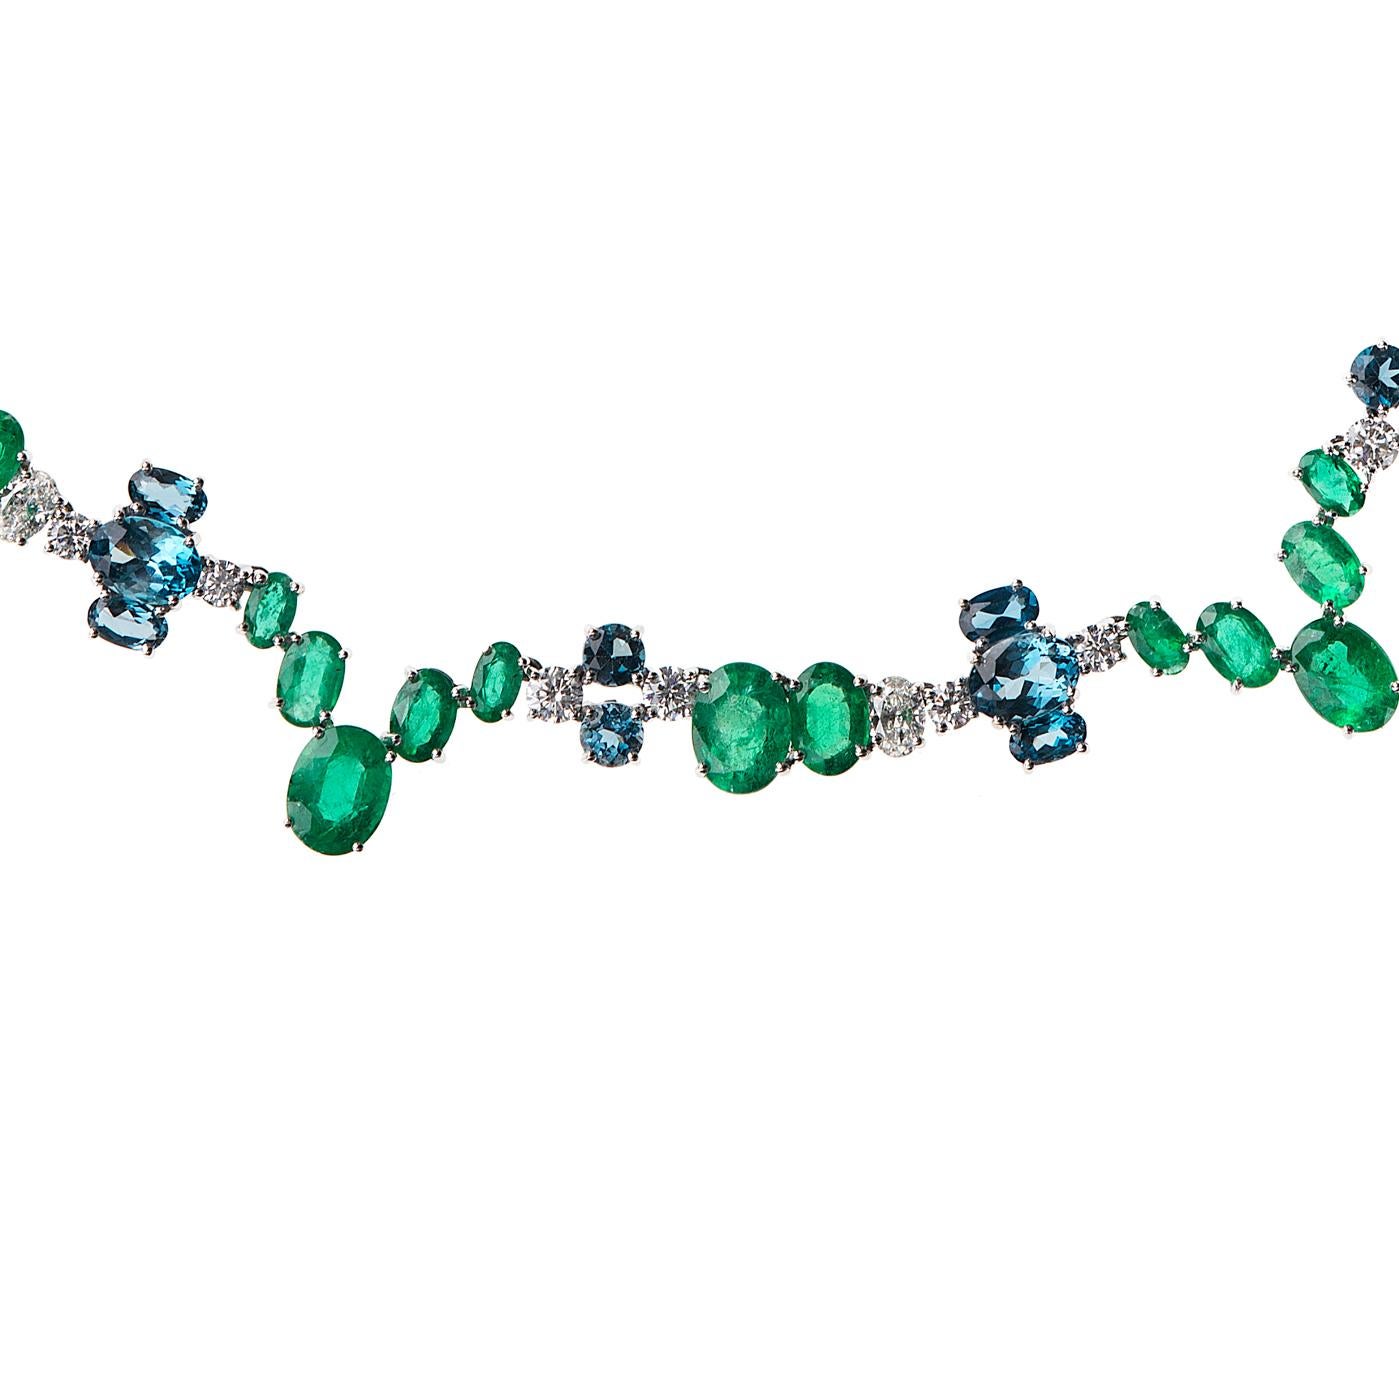 Nikos Koulis Eden collection one-of-a-kind 18K white gold necklace with 32.23 cts emeralds, 5.38 cts white diamonds, 16.31 cts london blue topazes